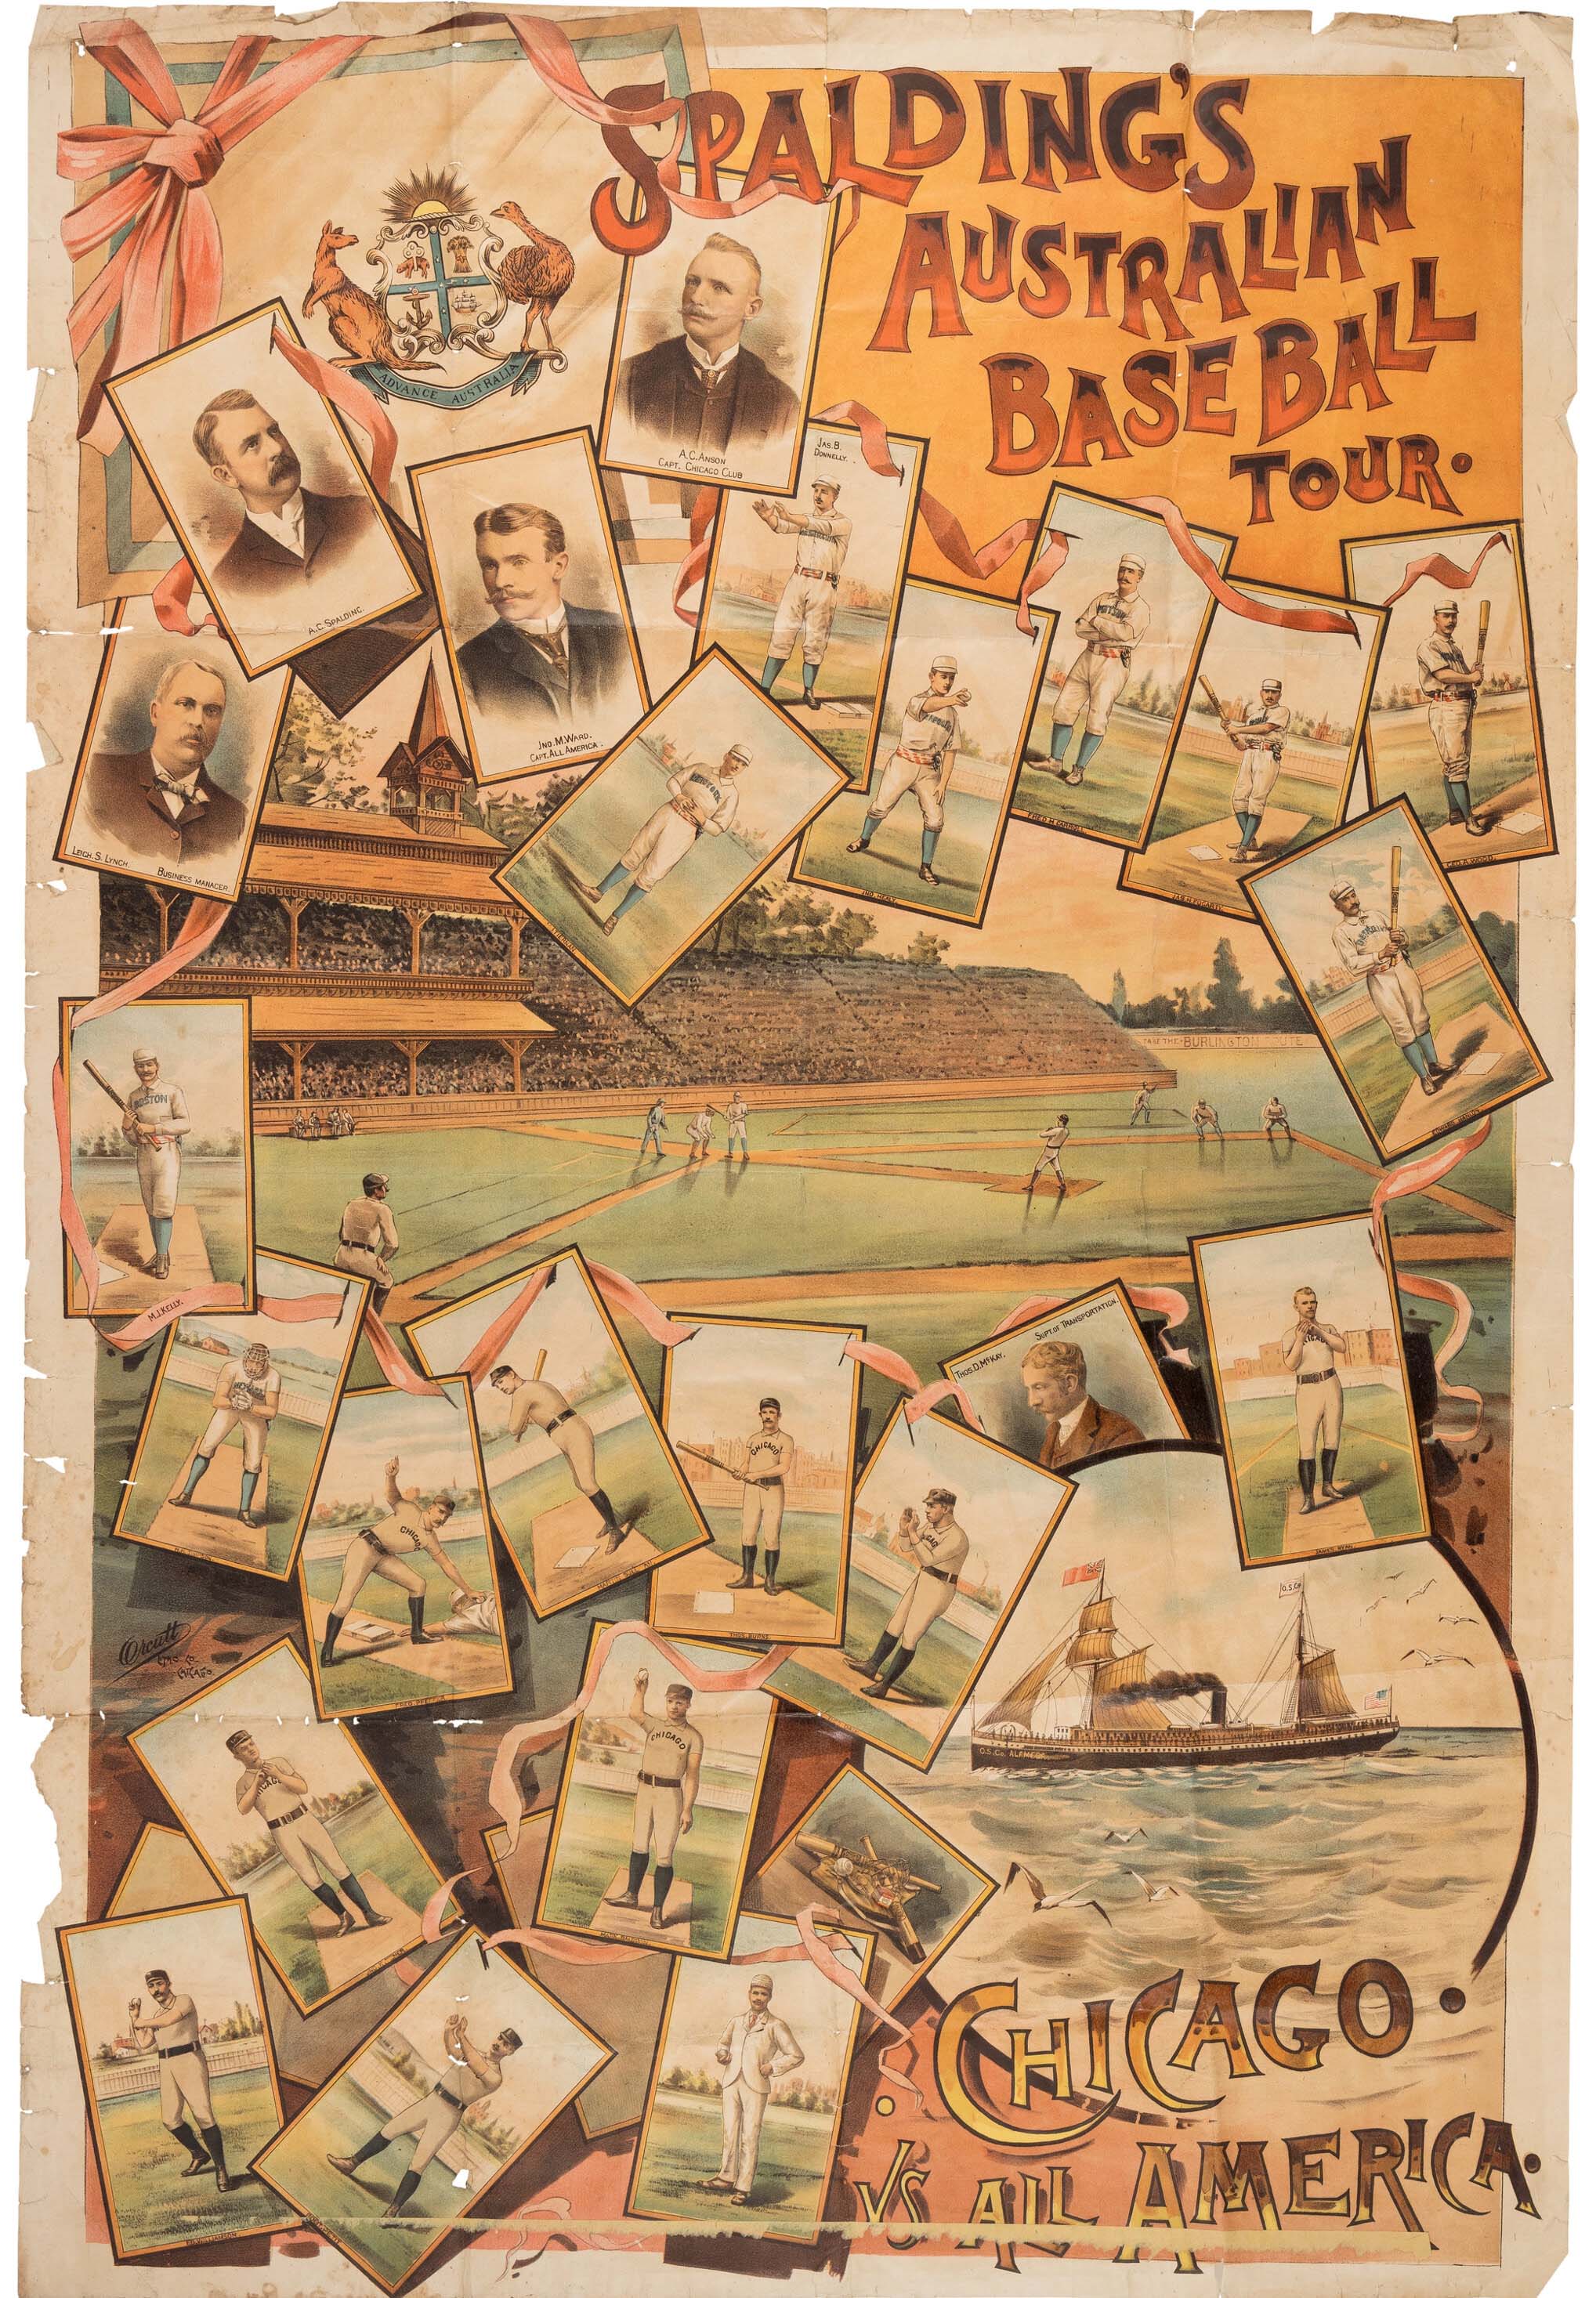 1888 Spalding Baseball World Tour poster, which sold for $200,000 ($240,000 with buyer's premium) at Heritage.